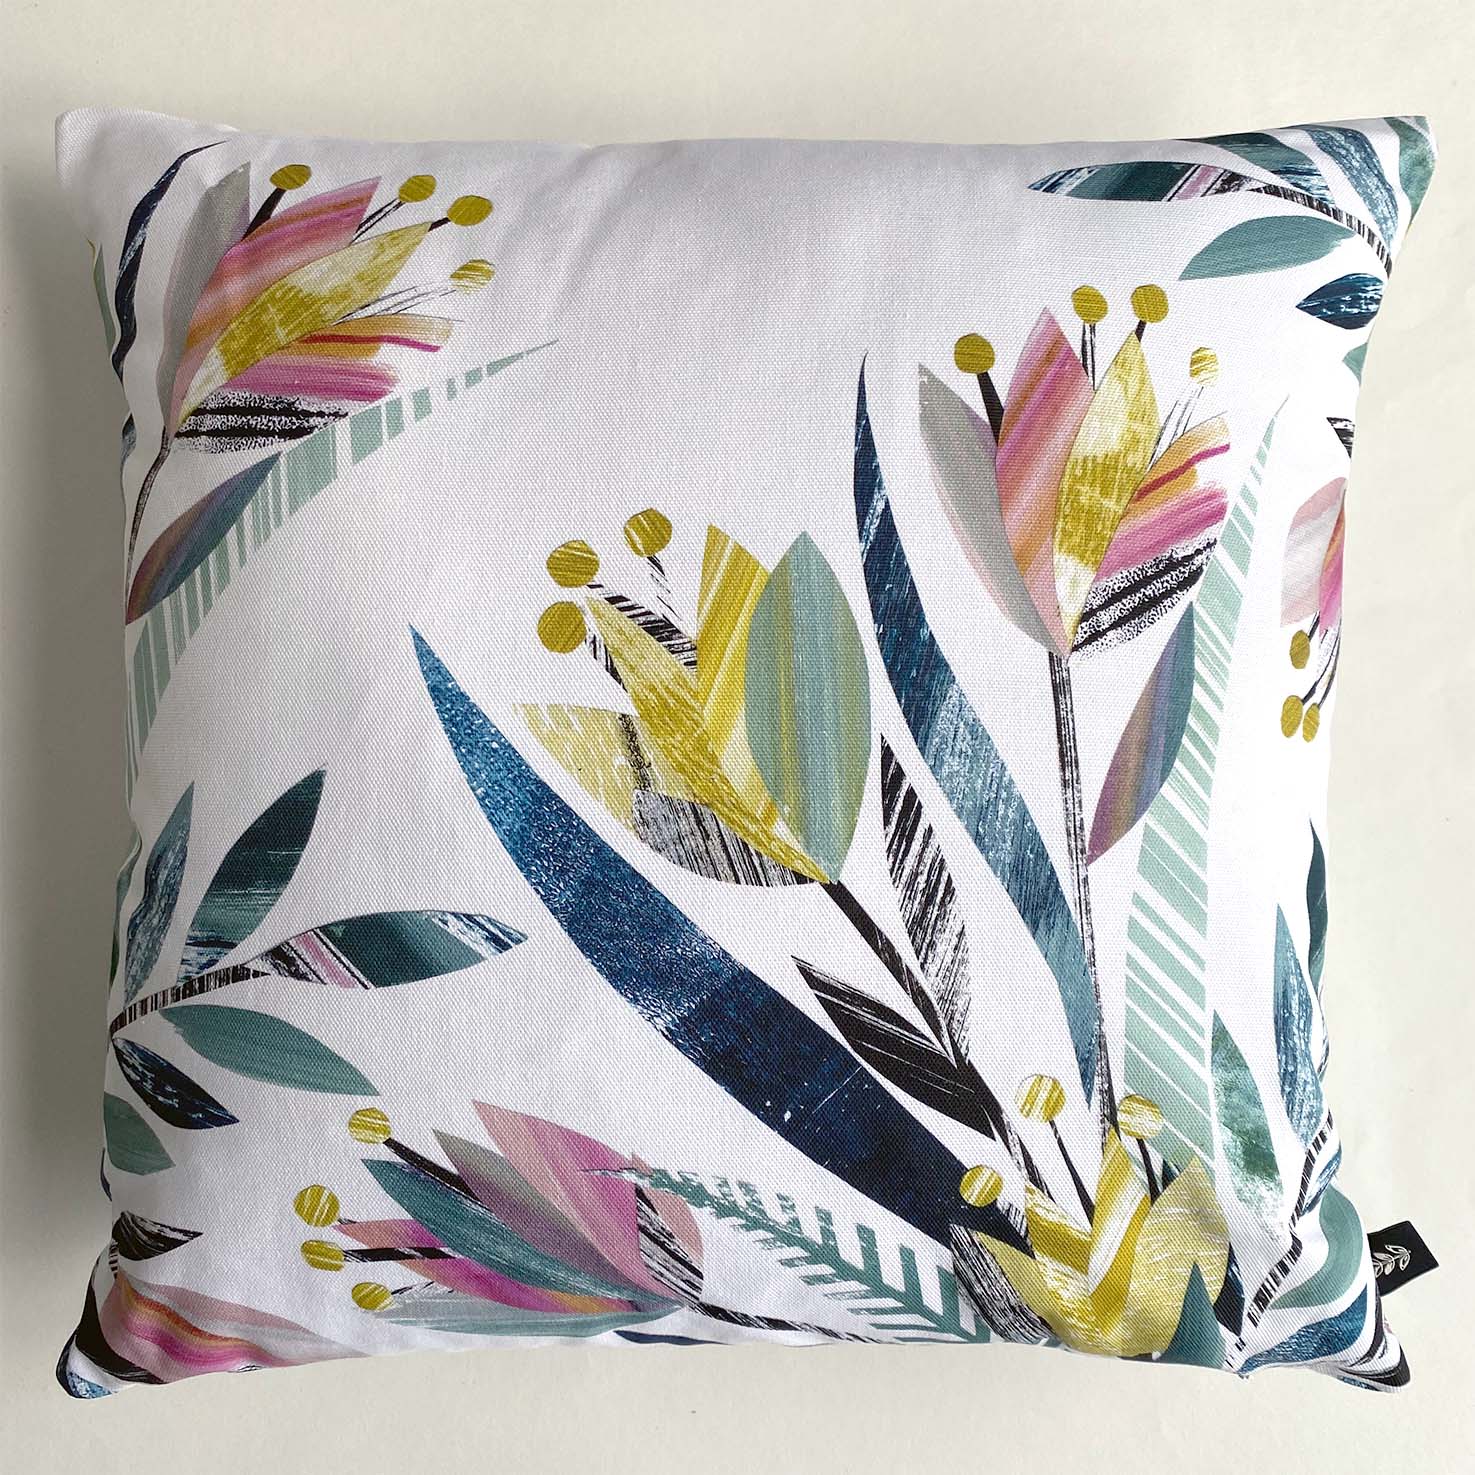  A square Tulip Cushion featuring textured Pink and Yellow Tulips with green leaves in a placement print on a plain white Cushion.  It has been placed on a white background.